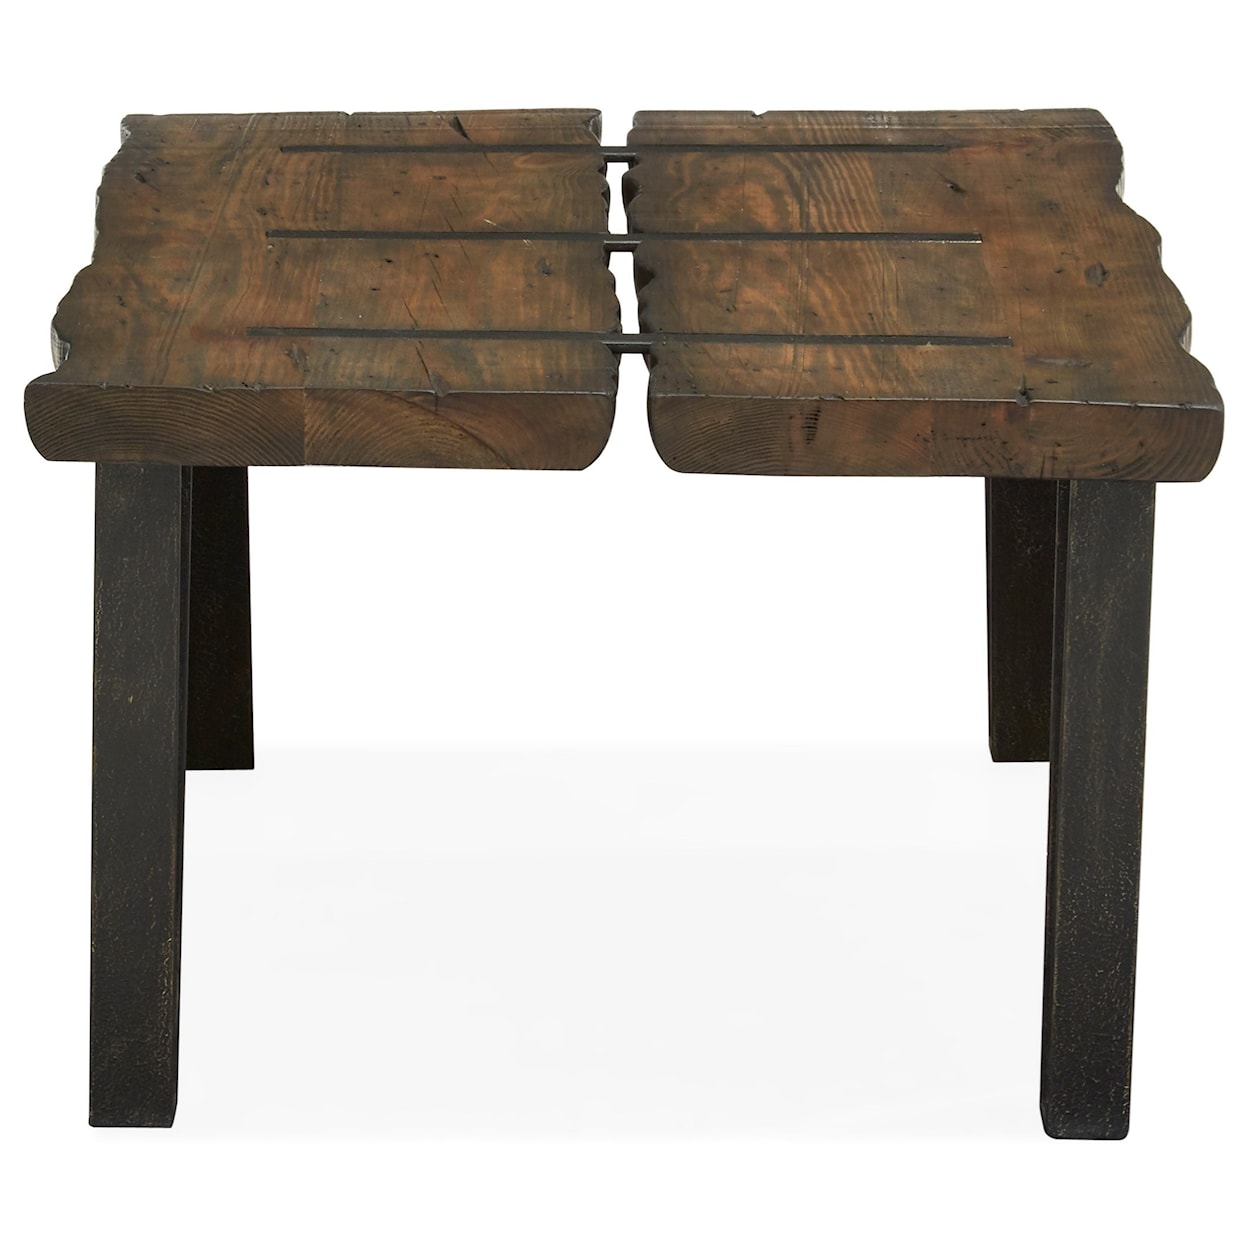 Magnussen Home Dartmouth Occasional Tables Cocktail Table